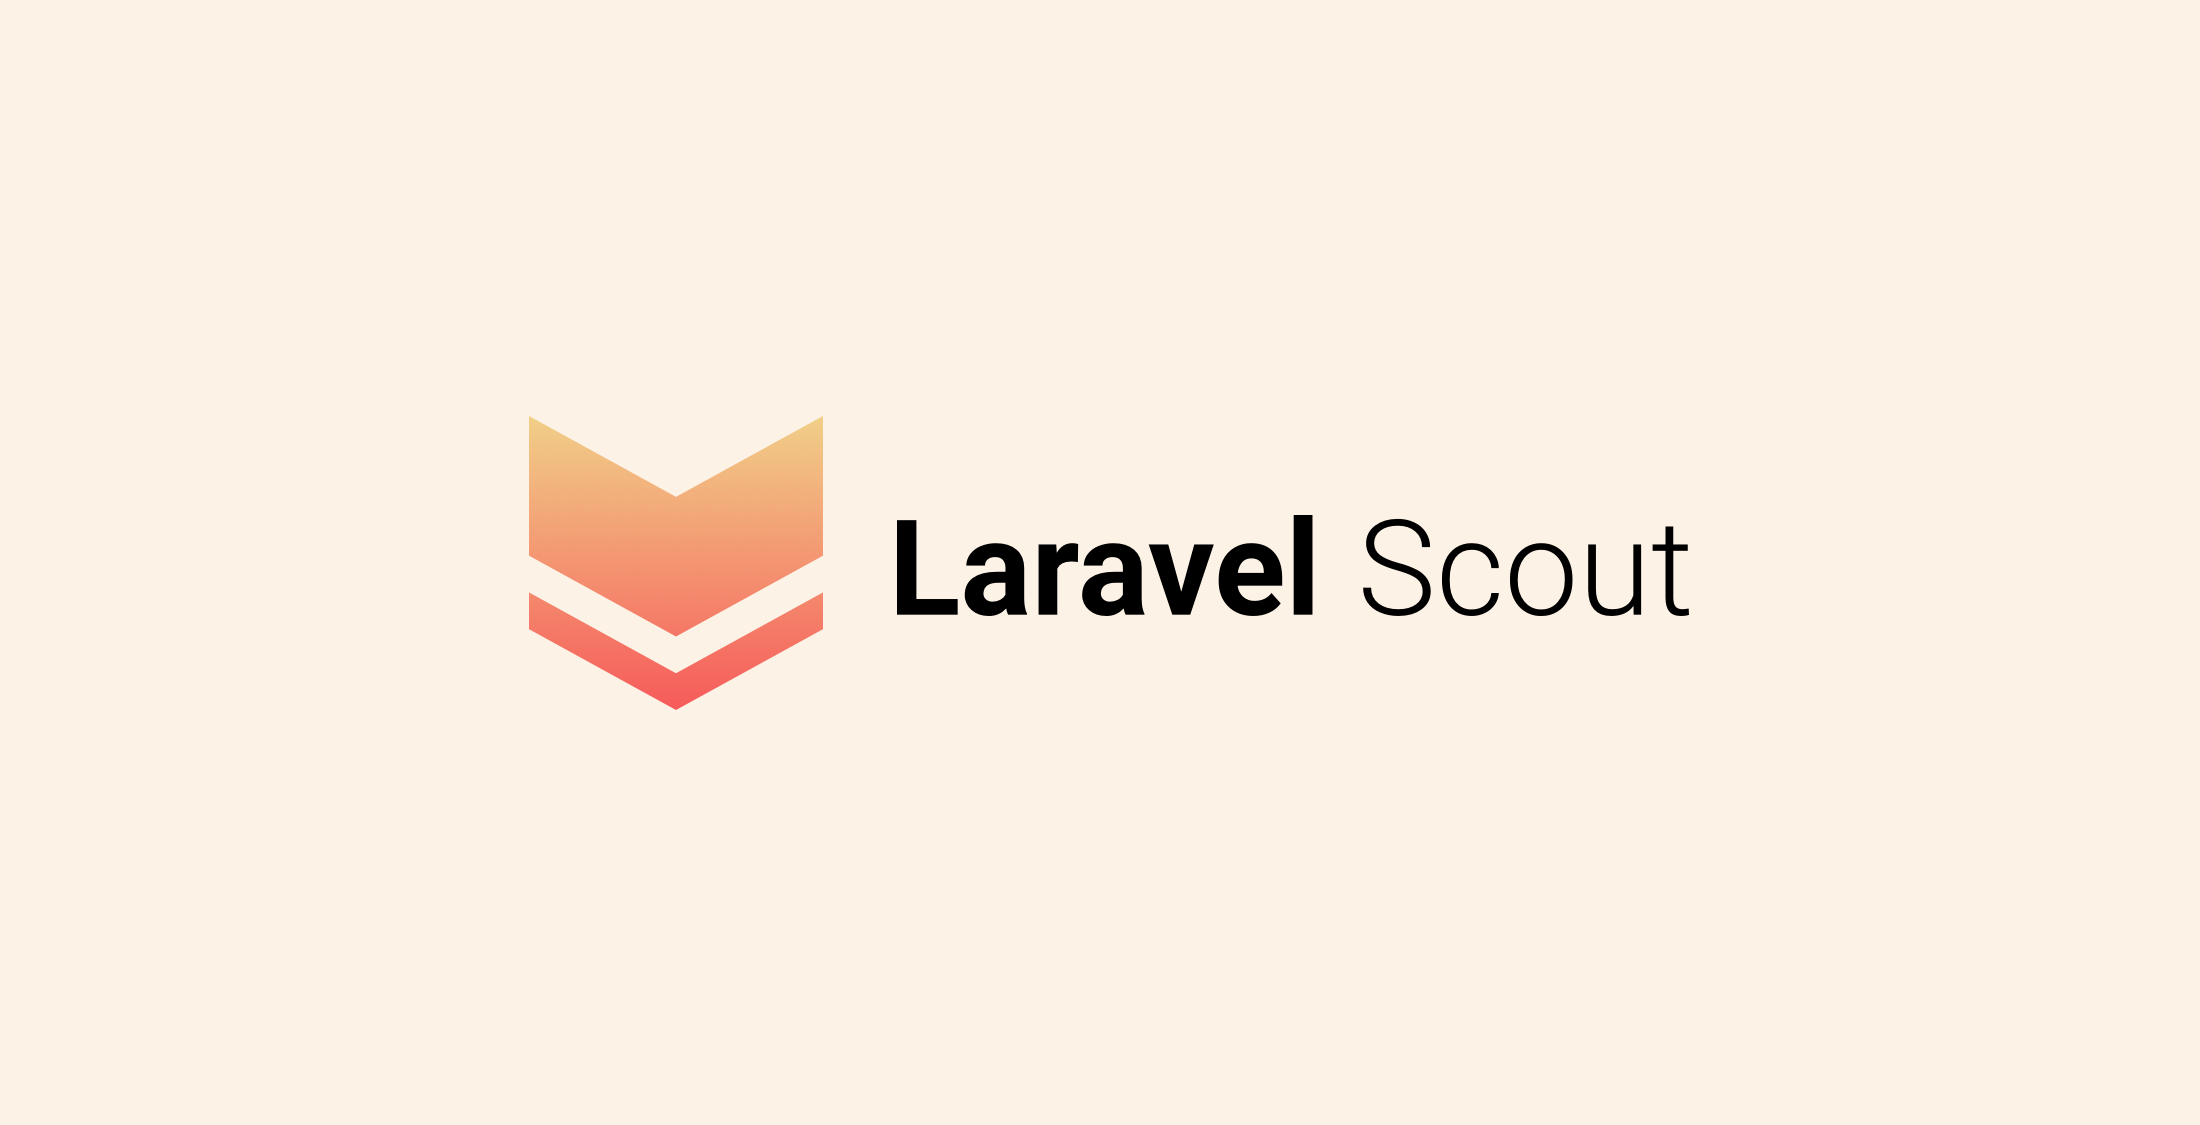 A practical guide to search Eloquent relationships using Laravel Scout Database Driver image